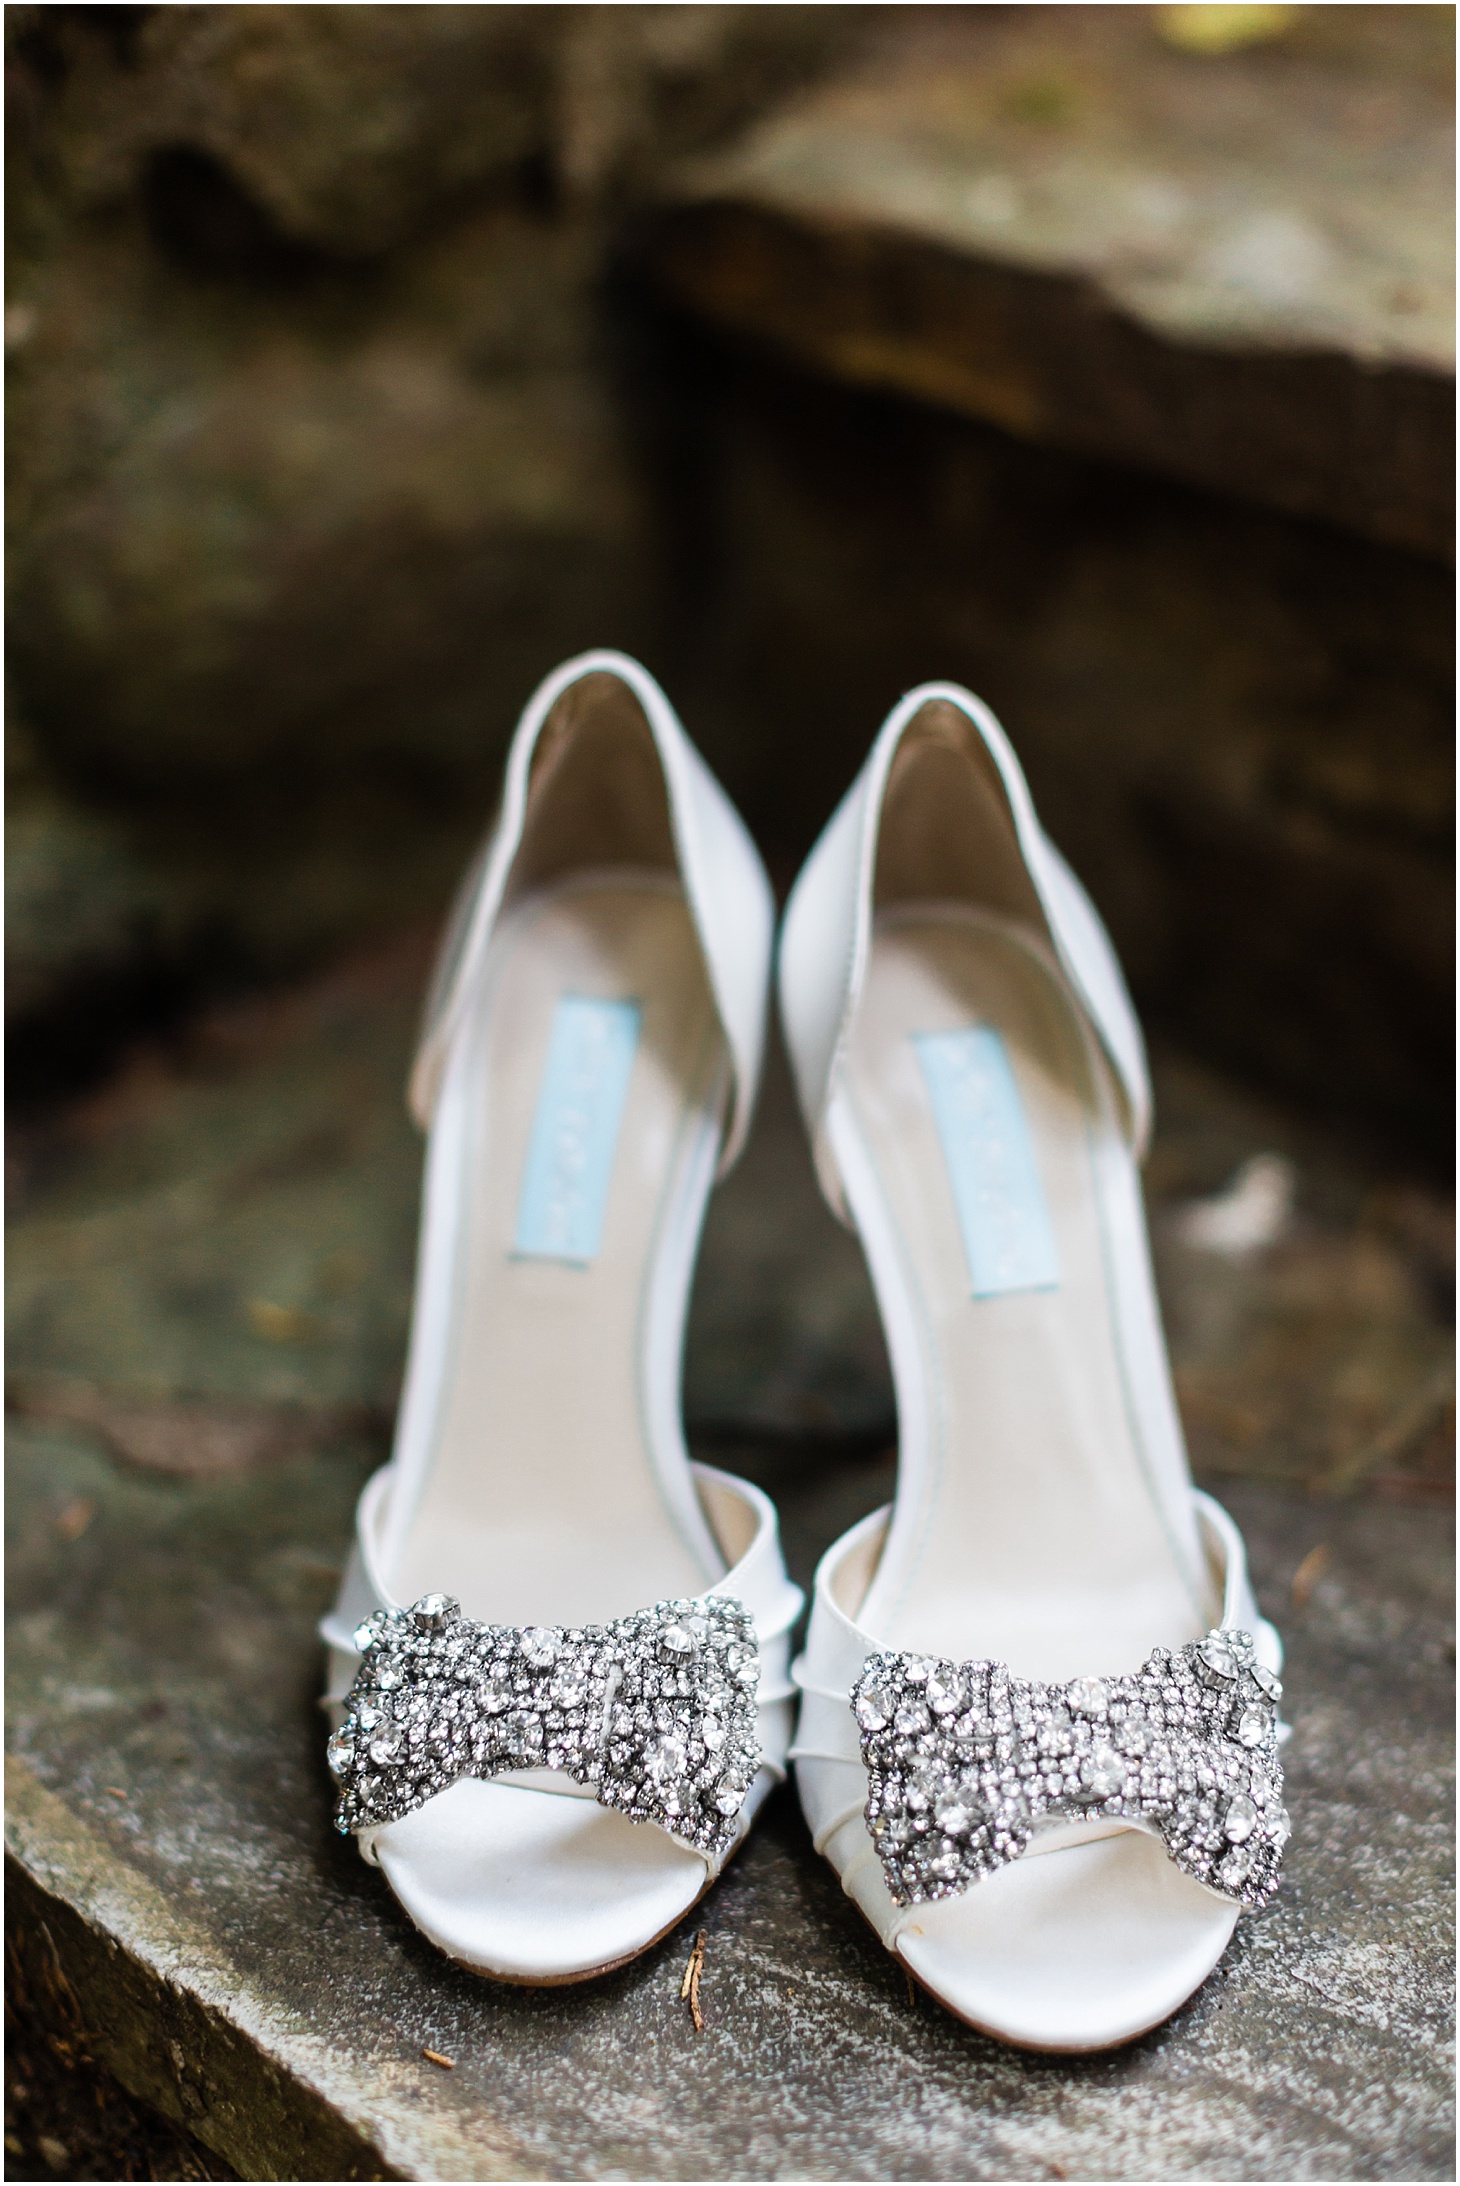 Ivory rhinestone bow wedding shoes | Hitched Salon Bridal Boutique | Equestrian-Inspired Fall Wedding Editorial at Poplar Springs Manor | Sarah Bradshaw Photography